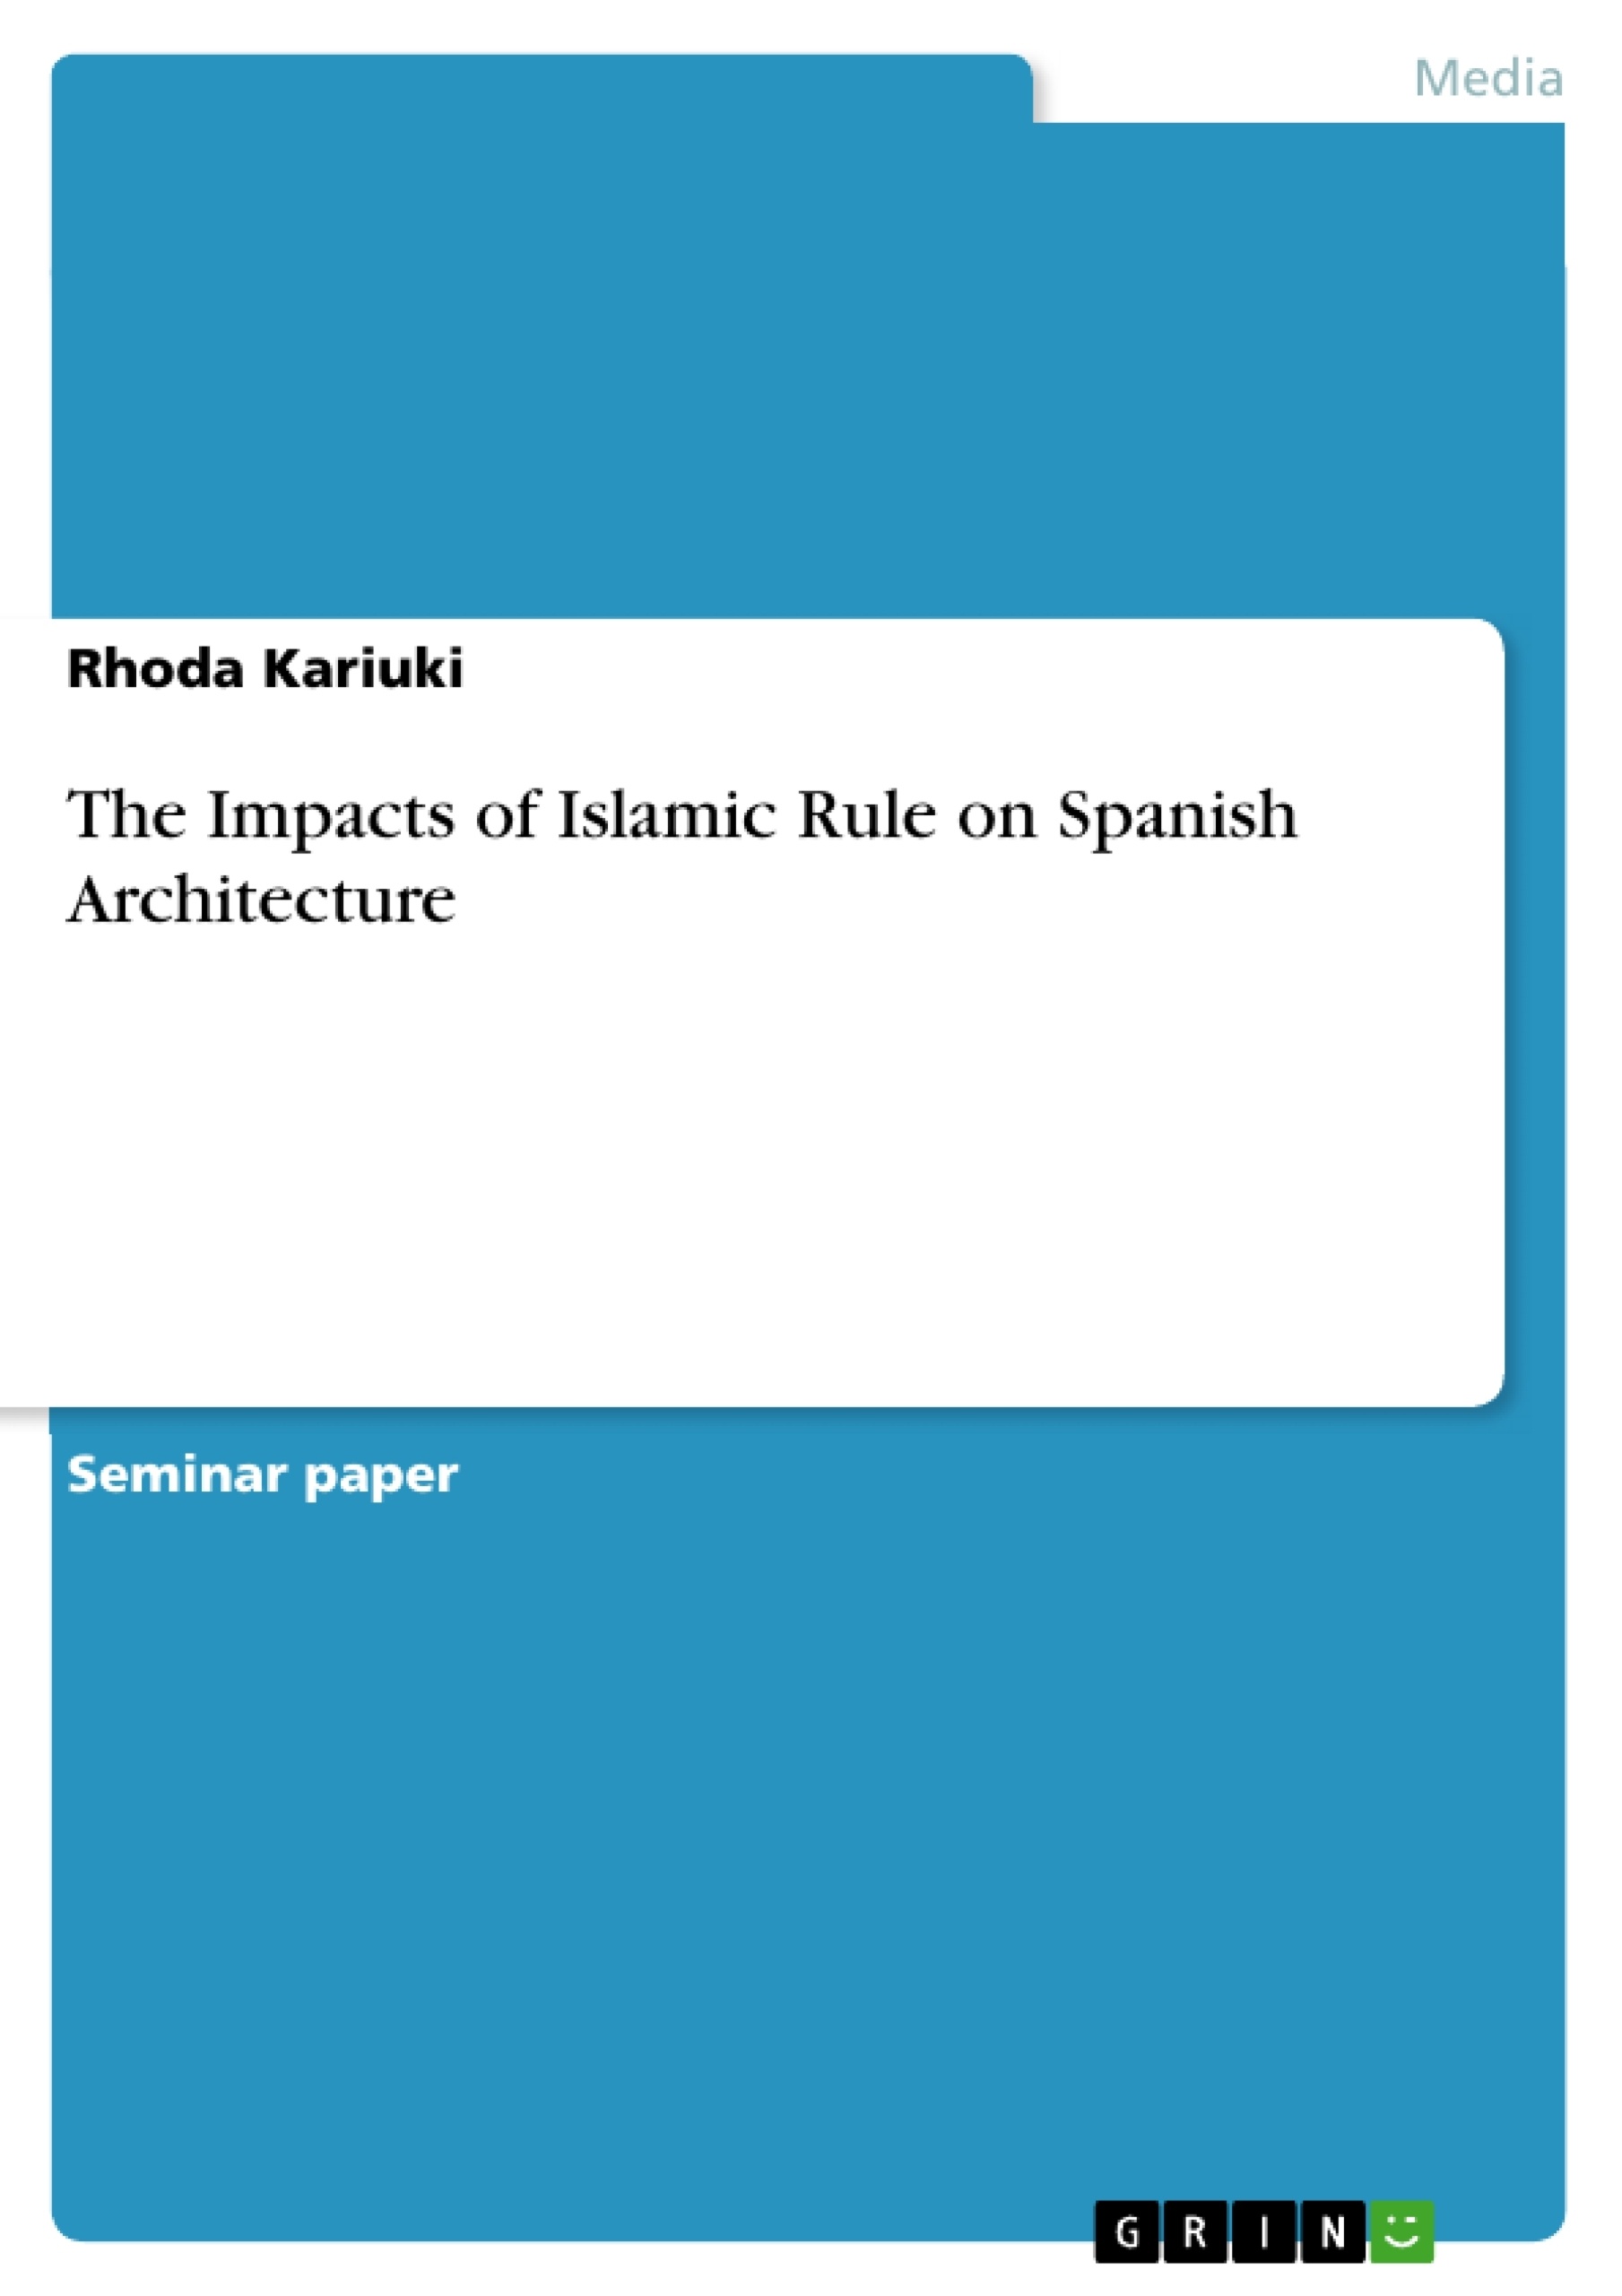 Title: The Impacts of Islamic Rule on Spanish Architecture